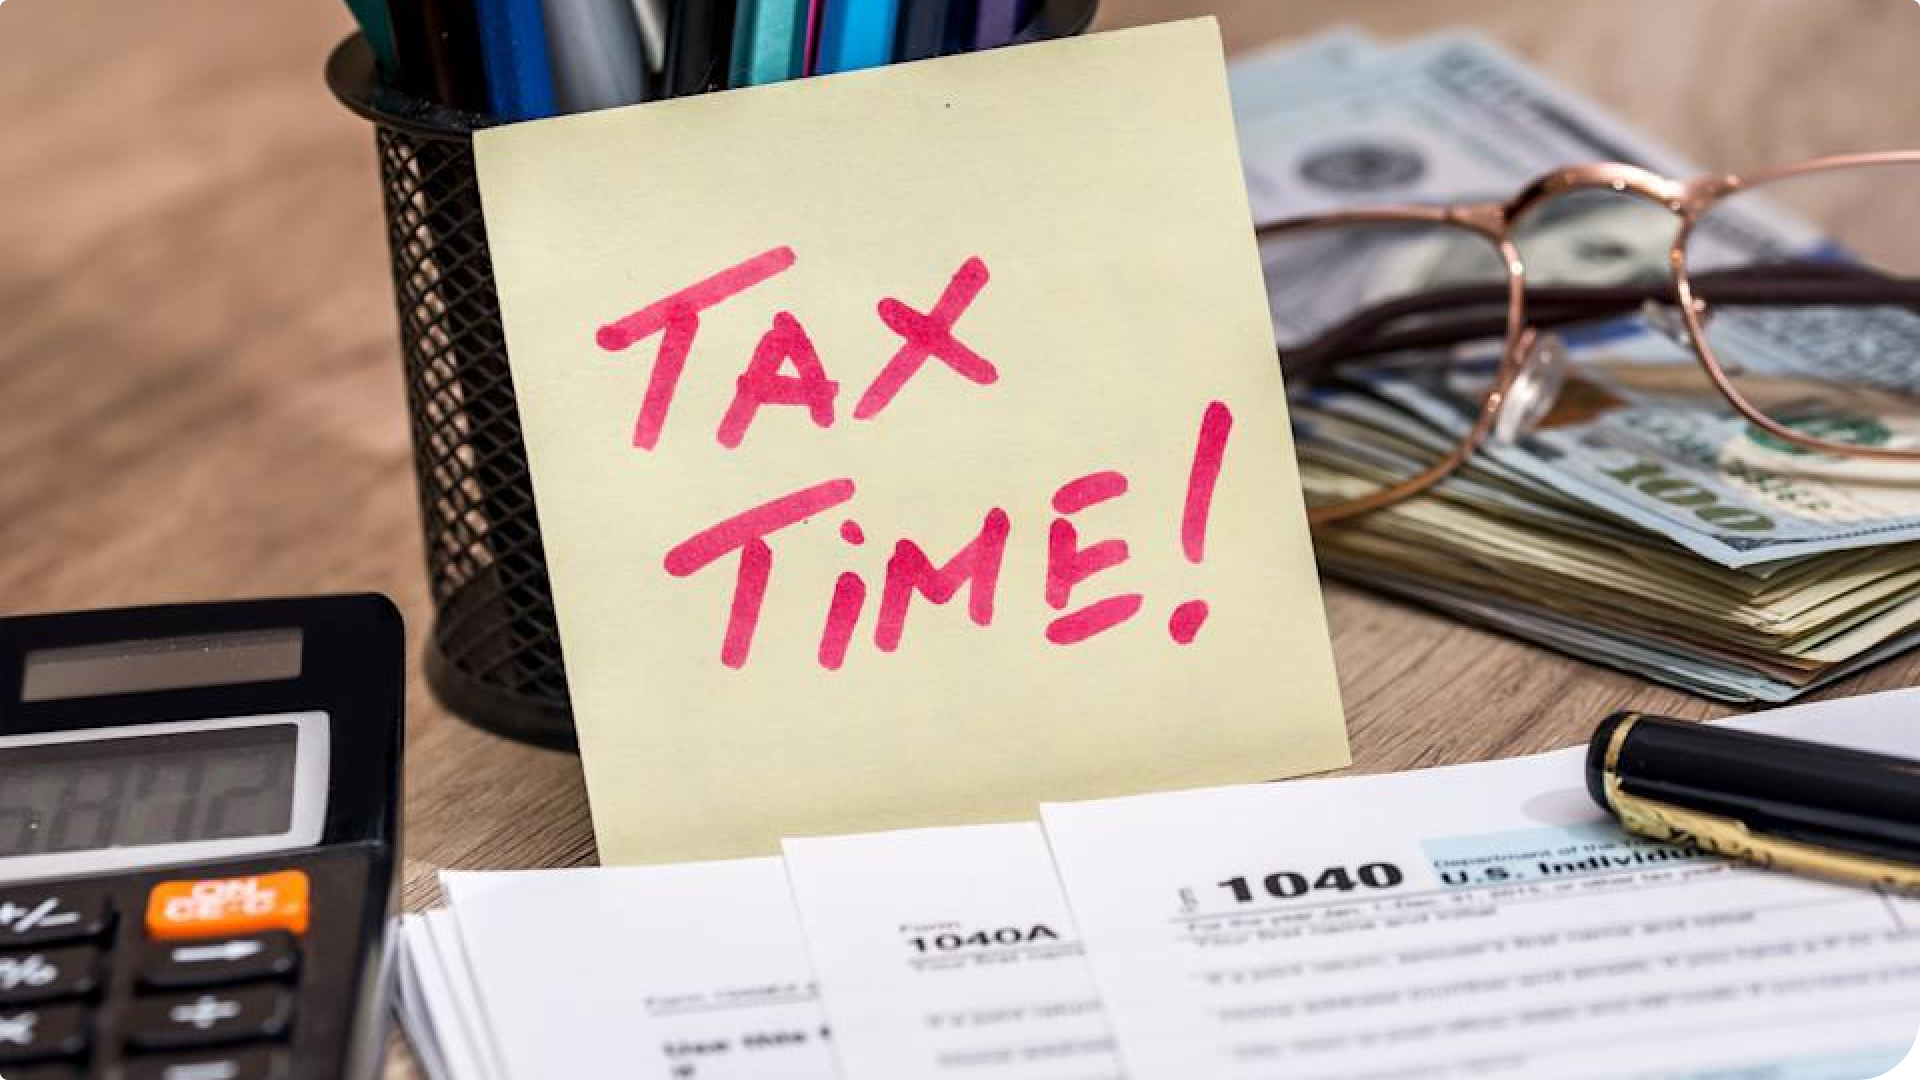 Understanding the Difference Between Old and New Tax Regimes